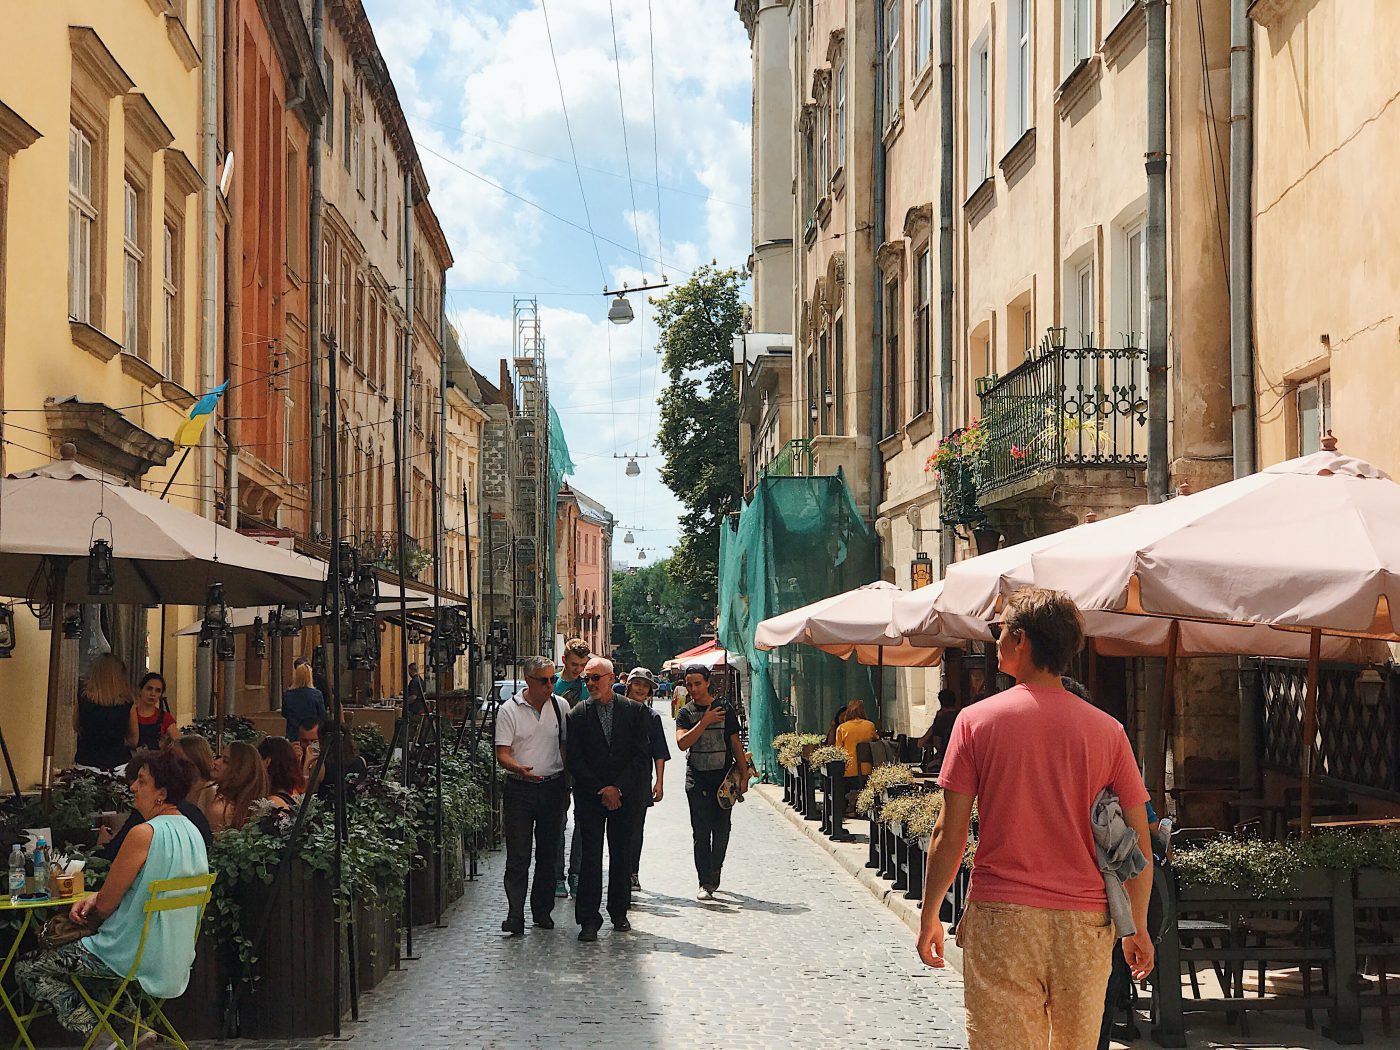 A typical alley in Lviv